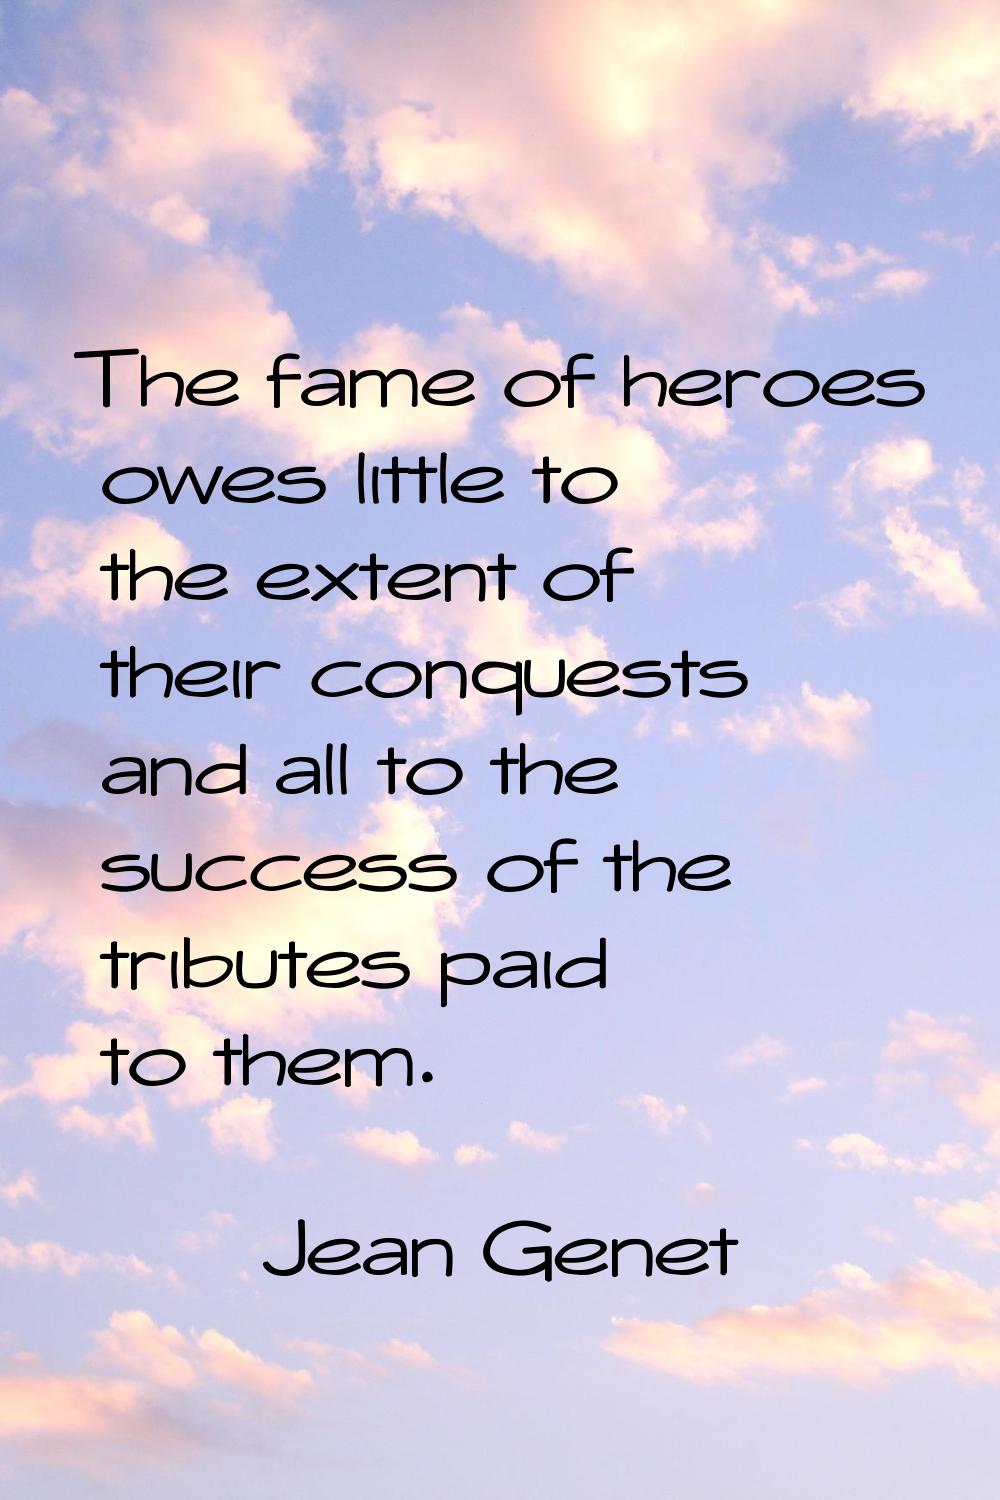 The fame of heroes owes little to the extent of their conquests and all to the success of the tribu